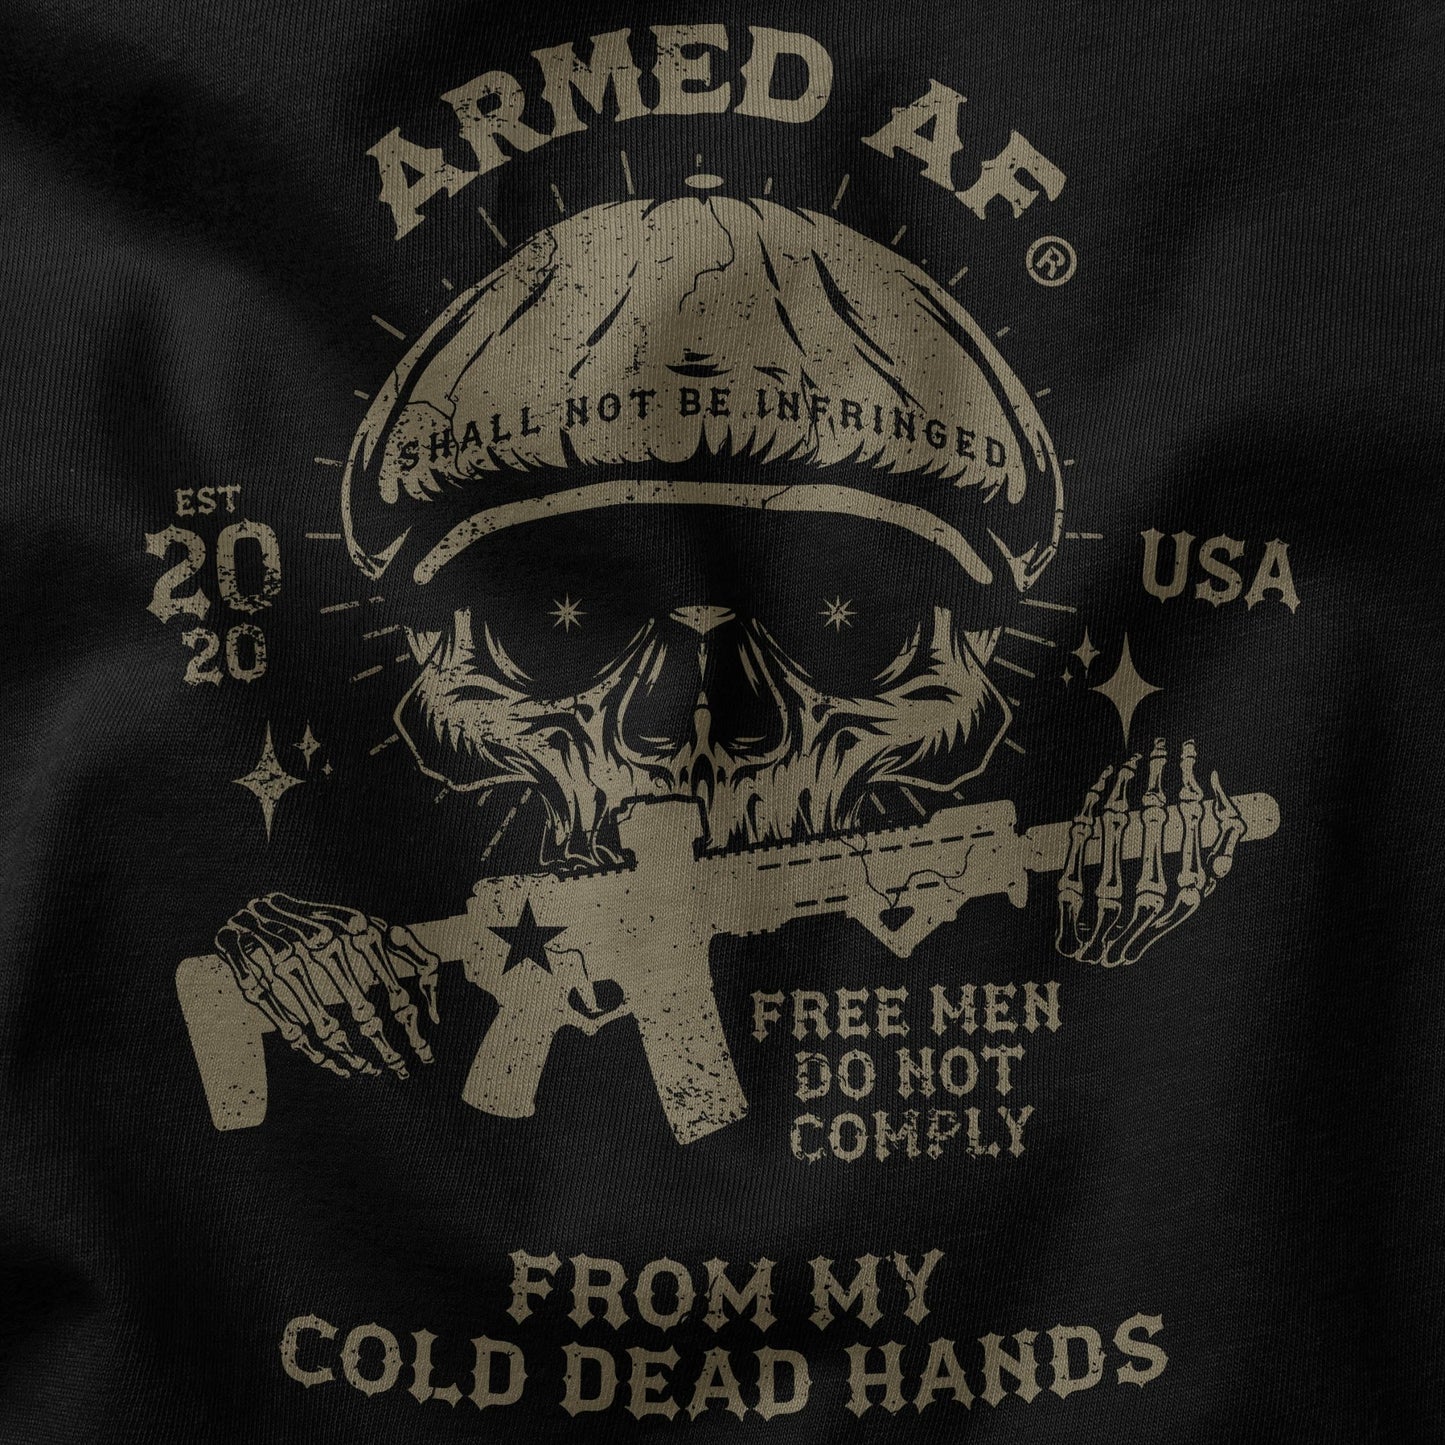 From my Cold Dead Hands t-shirt - ArmedAF